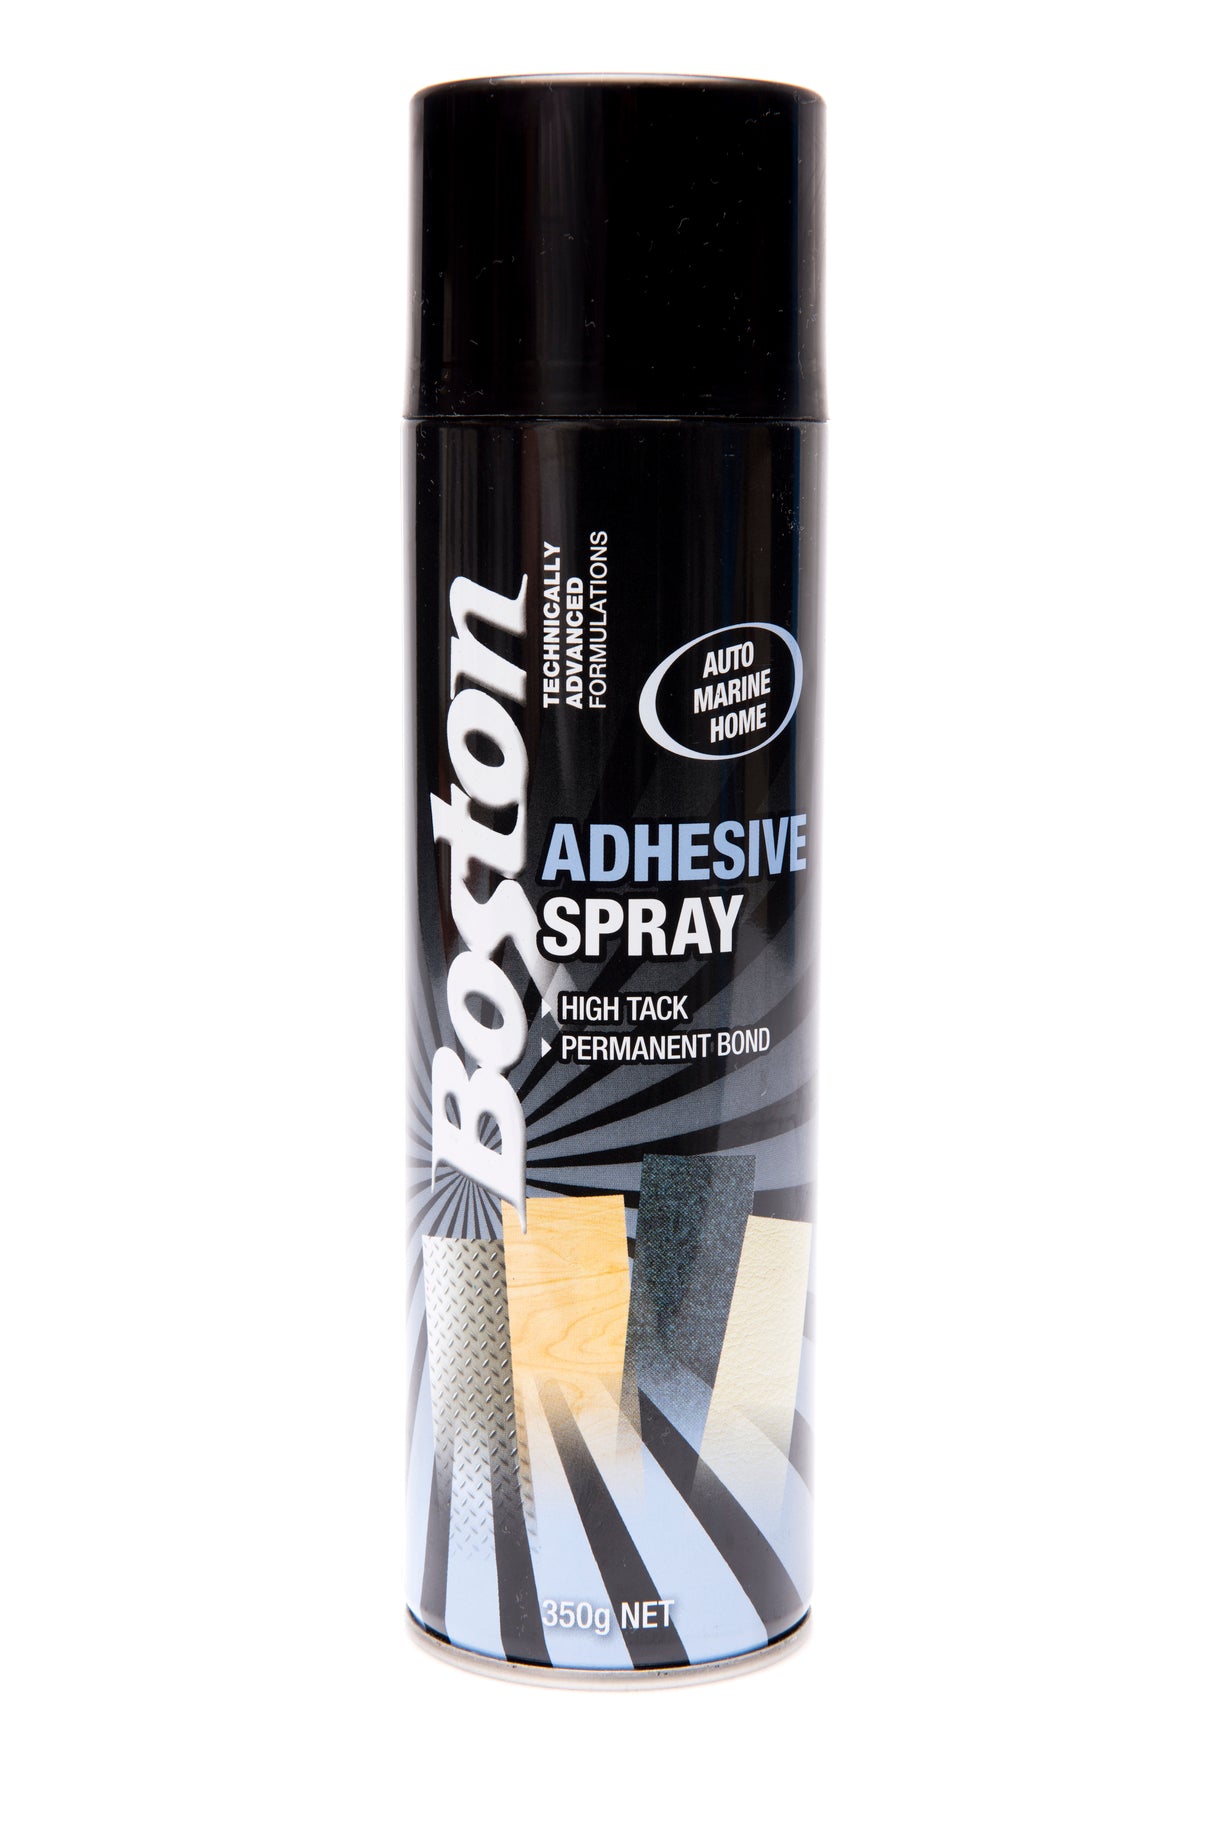 BOSTON ADHESIVE SPRAY 350GM 78690 - South East Clearance Centre